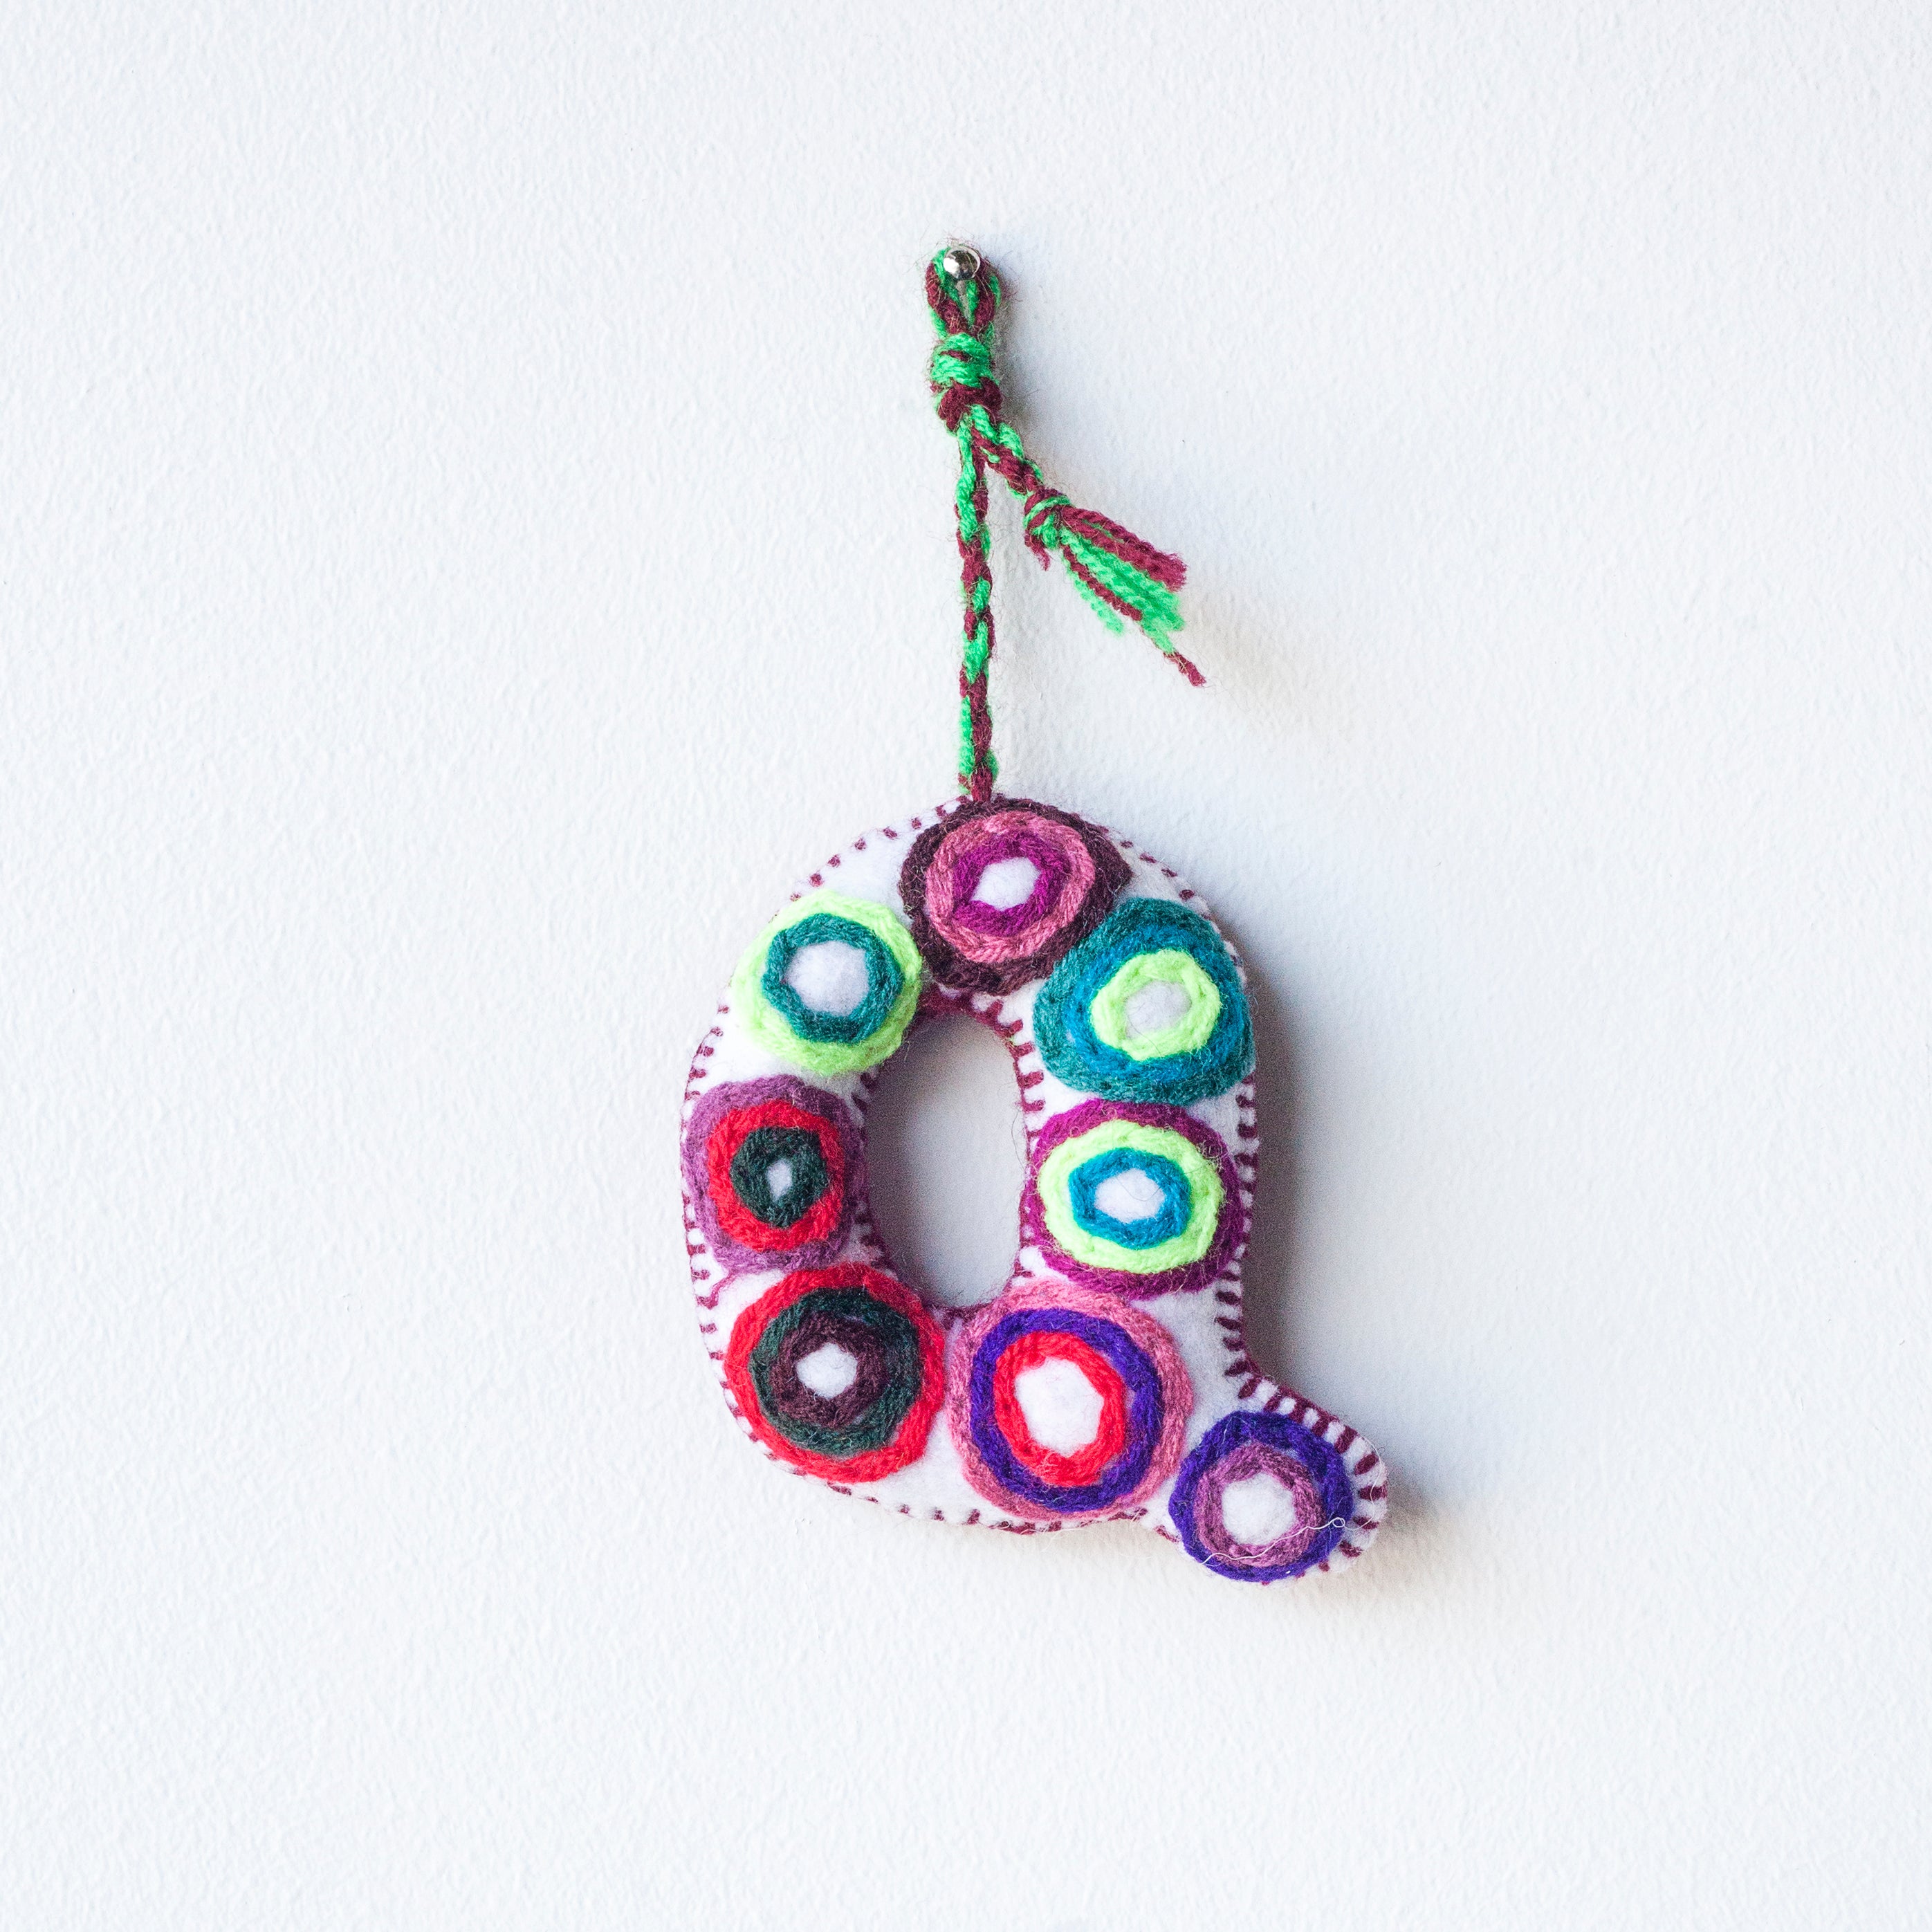 Colorful felt letter "Q" with multicolor floral hand-embroidery hanging by a colorful string.